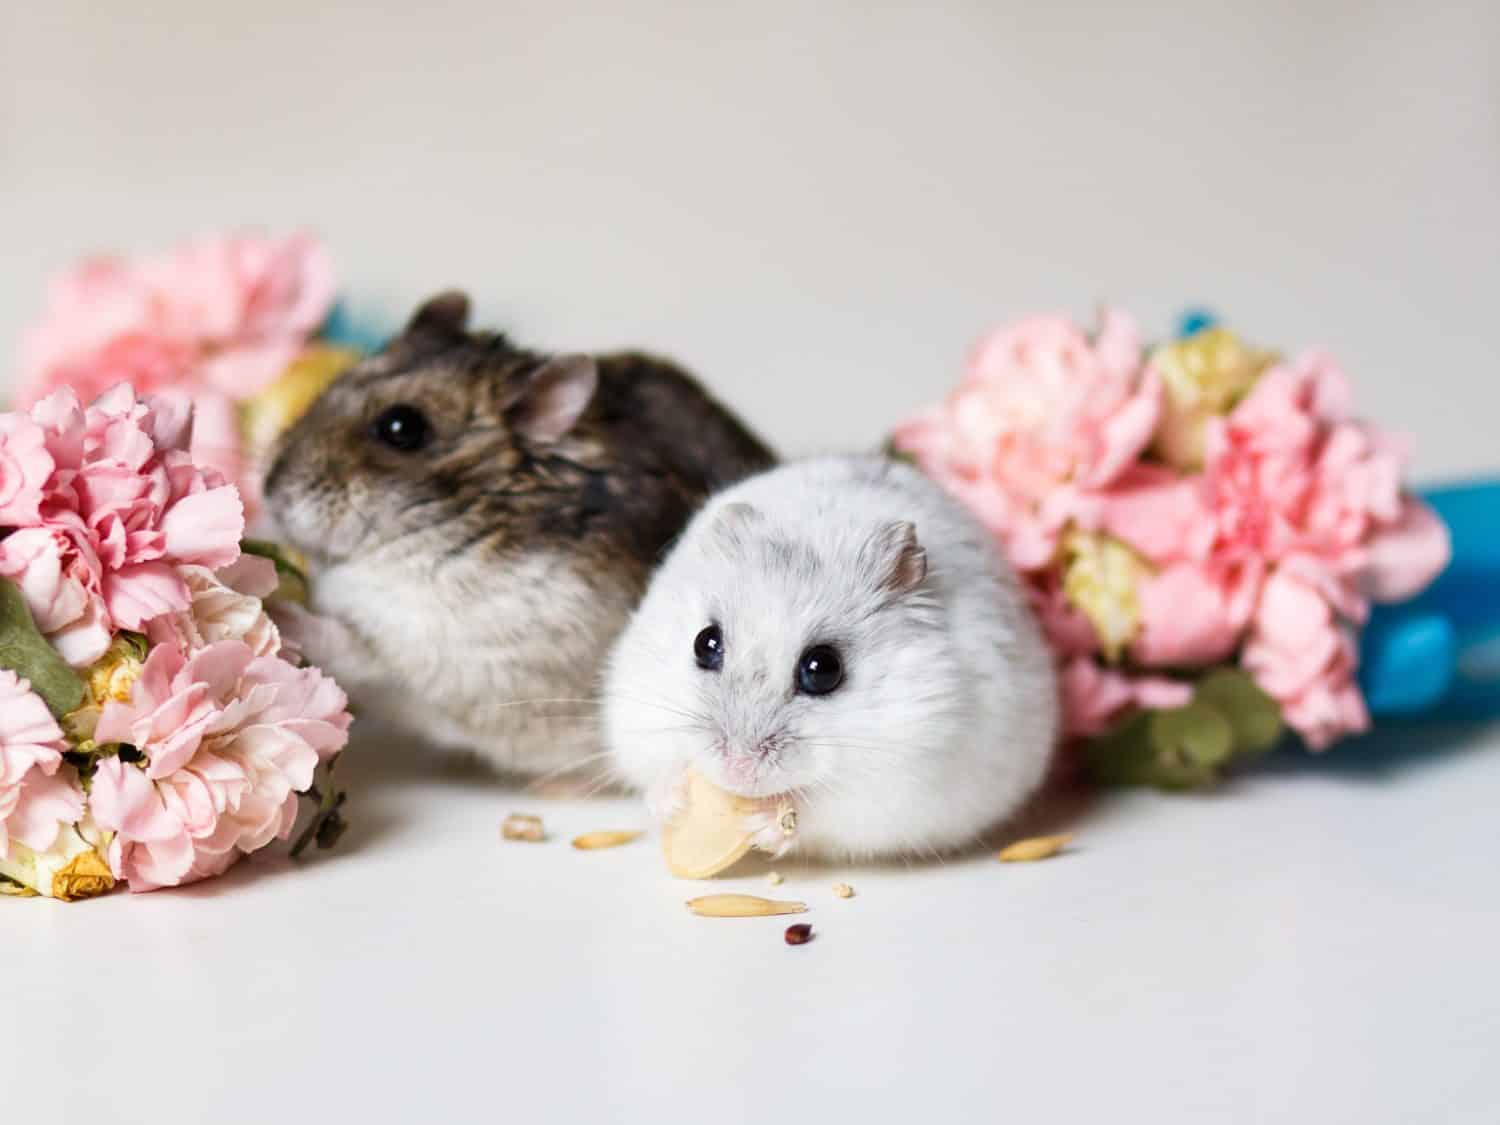 Closeup photo of two little hamsters near flowers